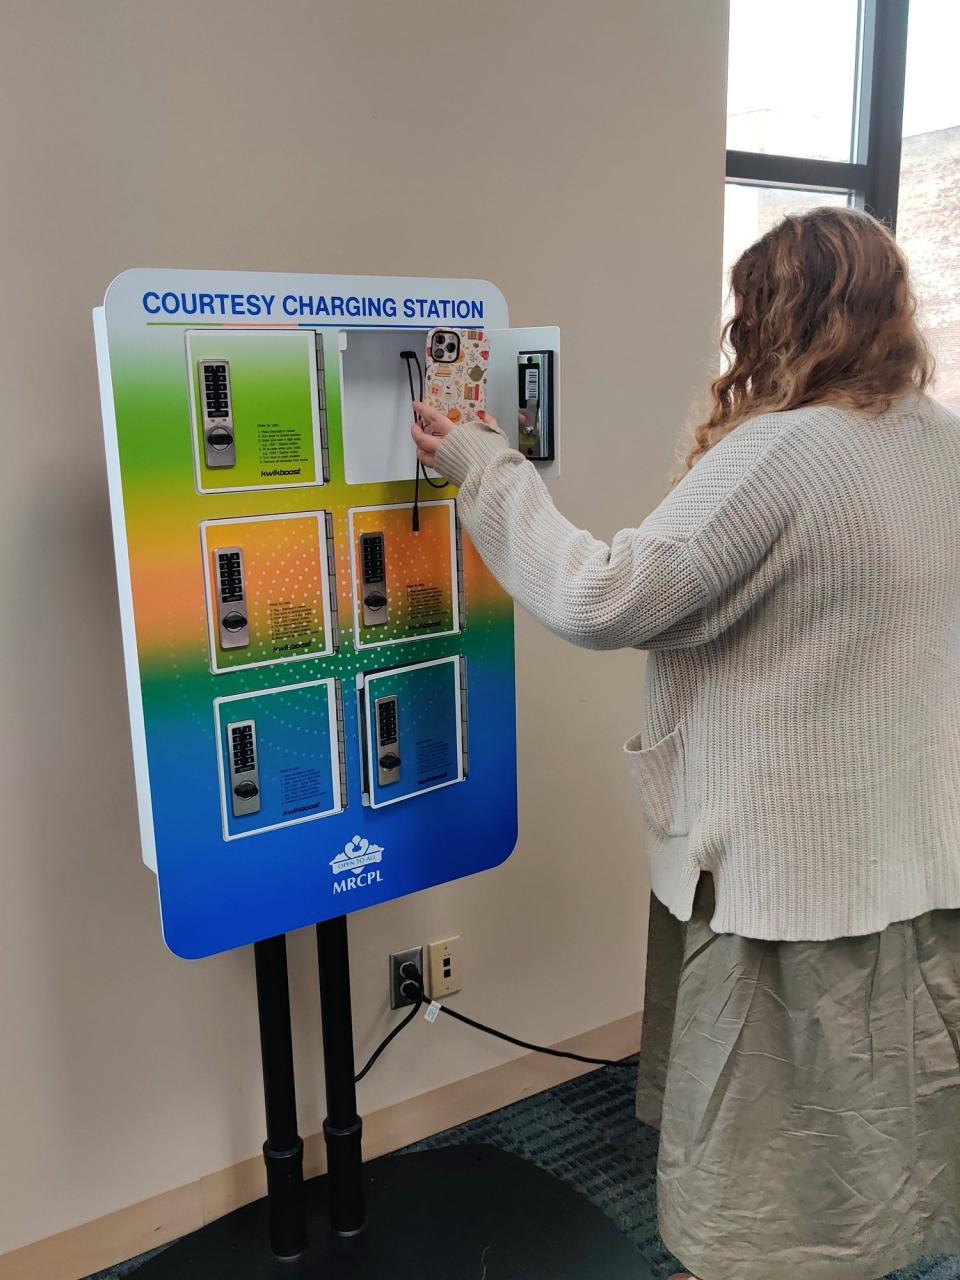 The Mansfield/Richland County Public Library has installed three courtesy charging stations at its main branch.